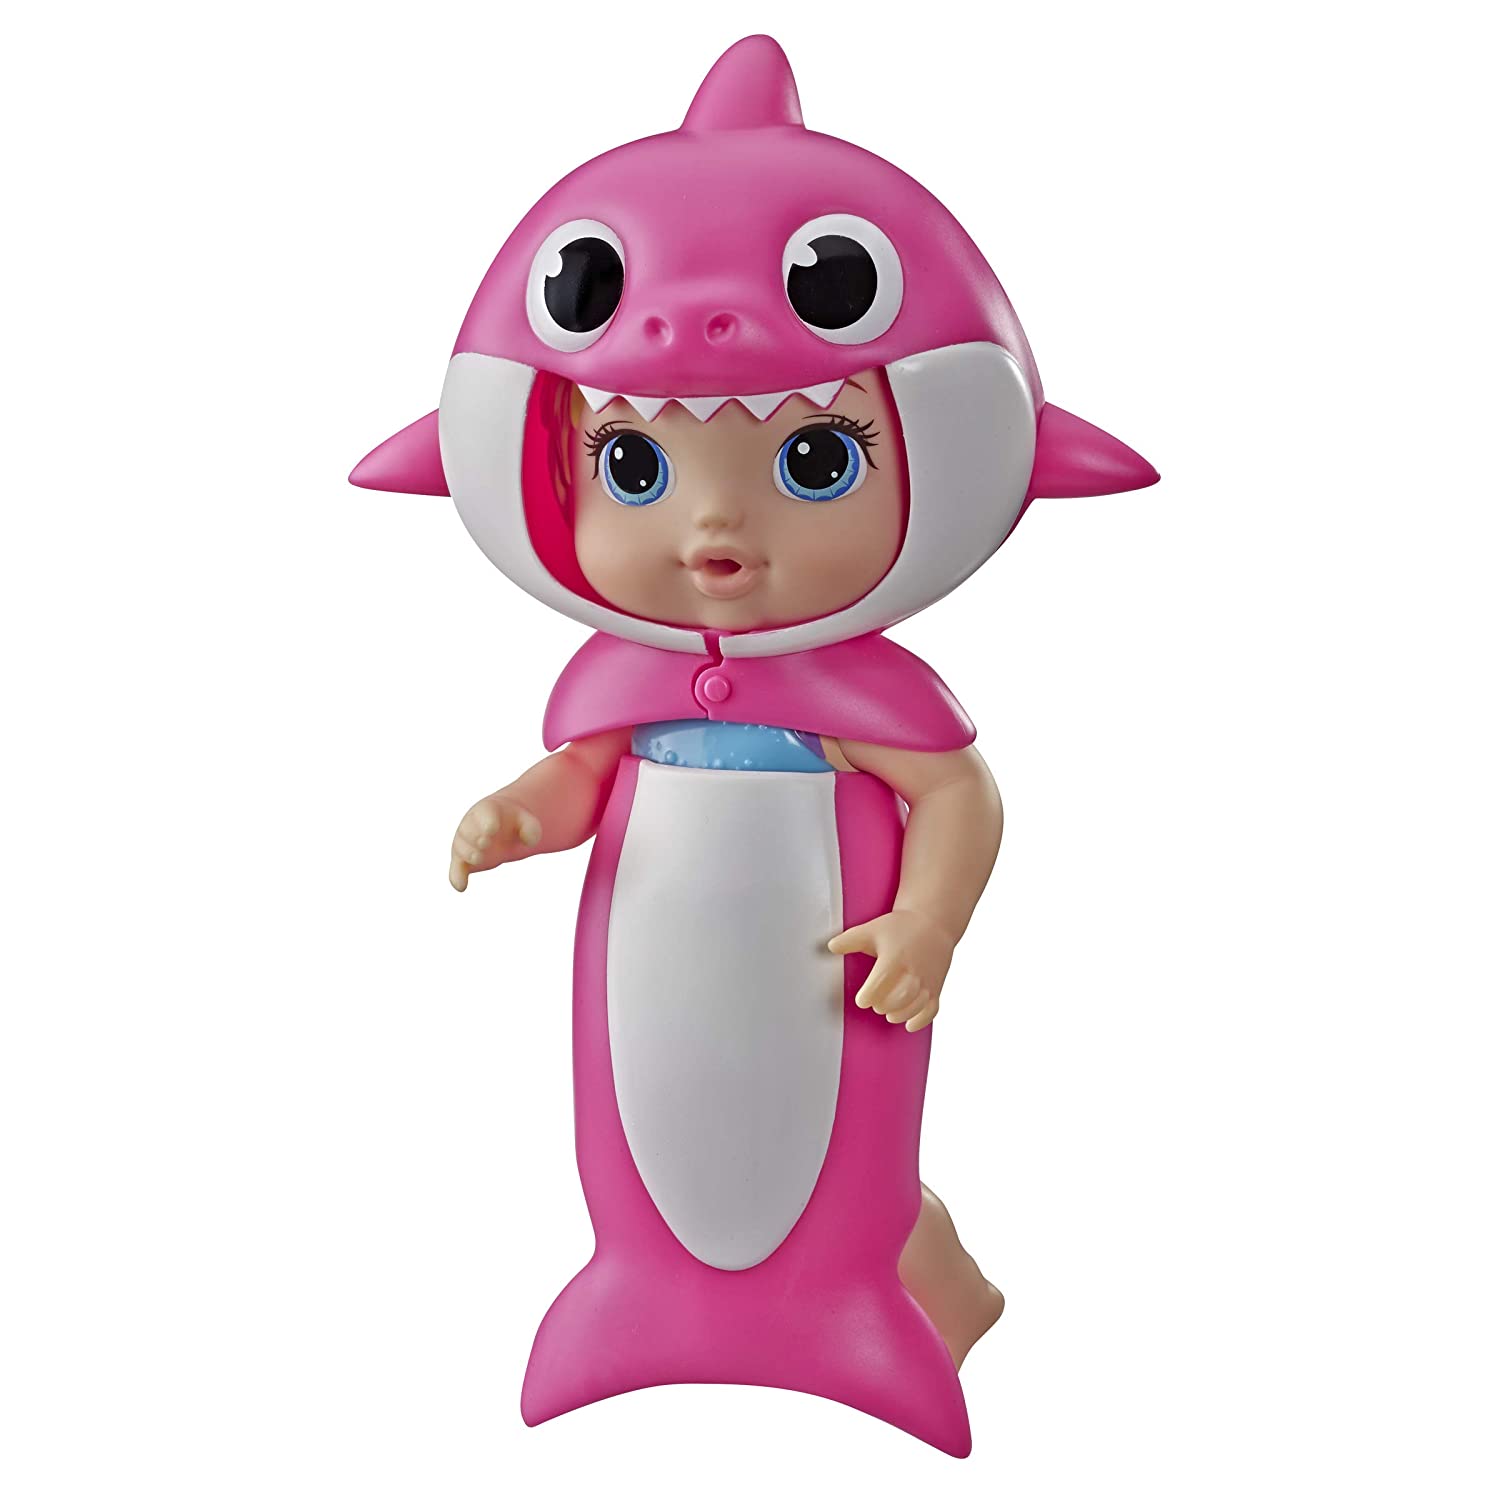 Baby Alive, Baby Shark Blonde Hair Doll, with Tail and Hood, Inspired by Hit Song and Dance, Waterplay Toy for Kids Ages 3 Years Old and Up